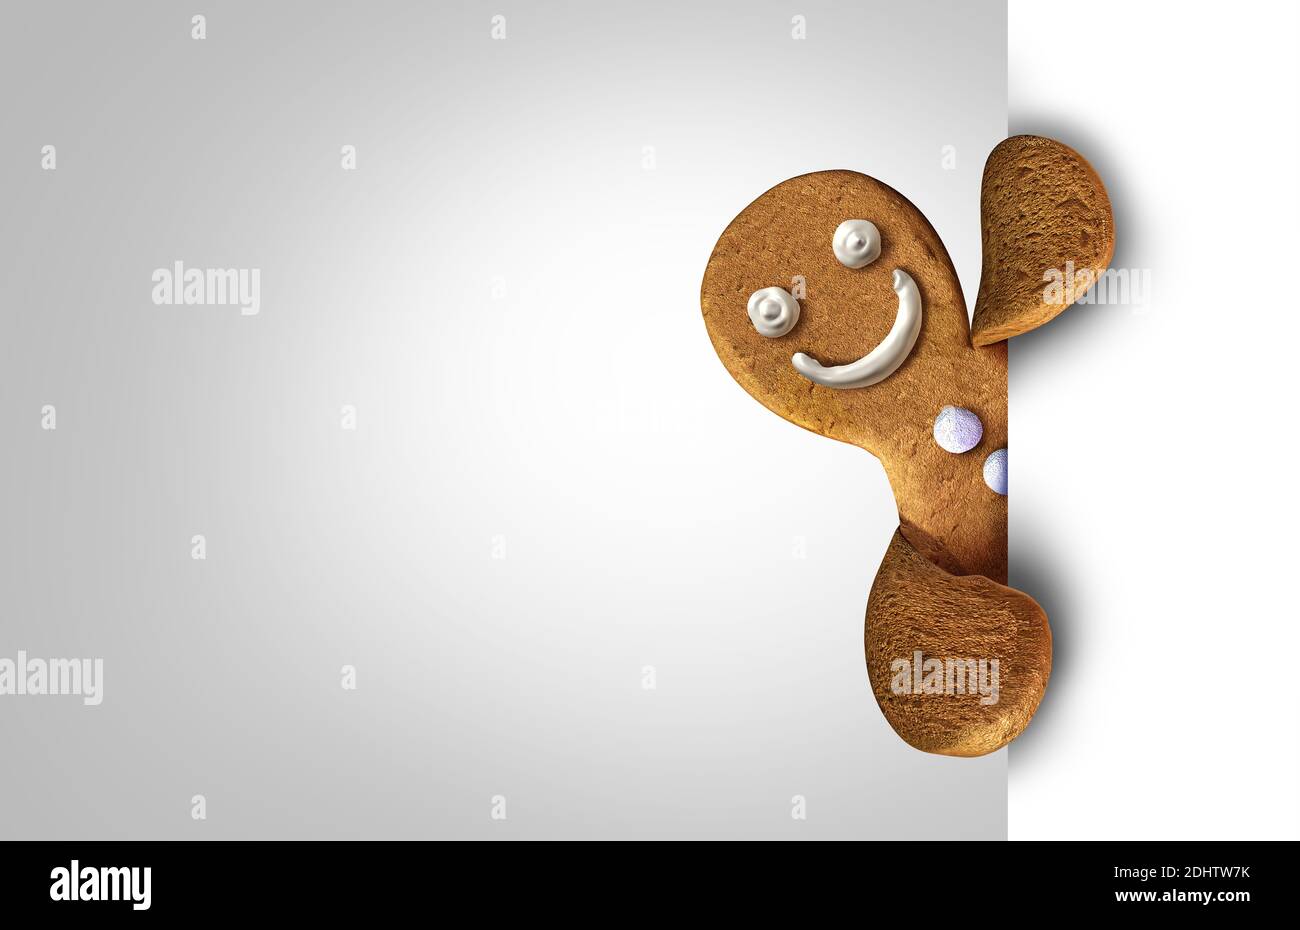 Gingerbread man with icing as a holiday cookie holding a sign or a ginger bread character behind a blank card as festive baking or festive holidays. Stock Photo